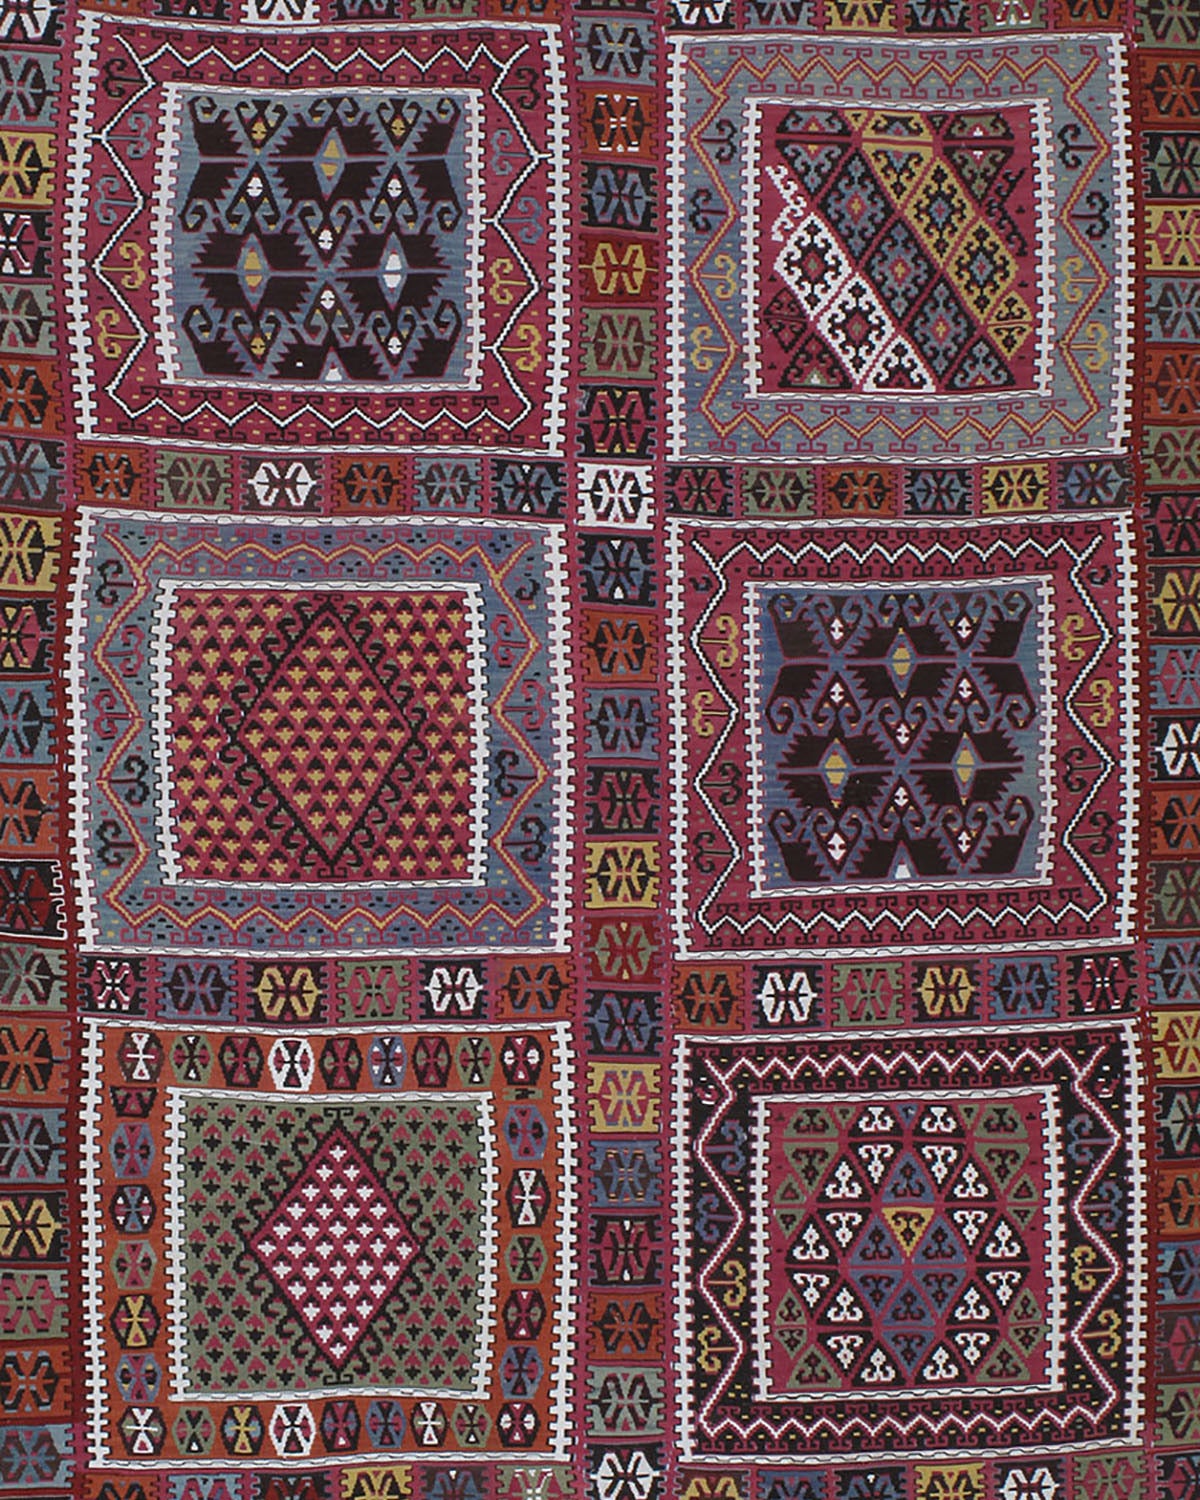 Superb antique Bayburt Kilim rug. A great antique kilim rug from Northeastern Turkey, finely woven with exquisite details, in a dazzling color palette derived from natural dyes. Bayburt kilims like this were prestigious objects, possibly made by the